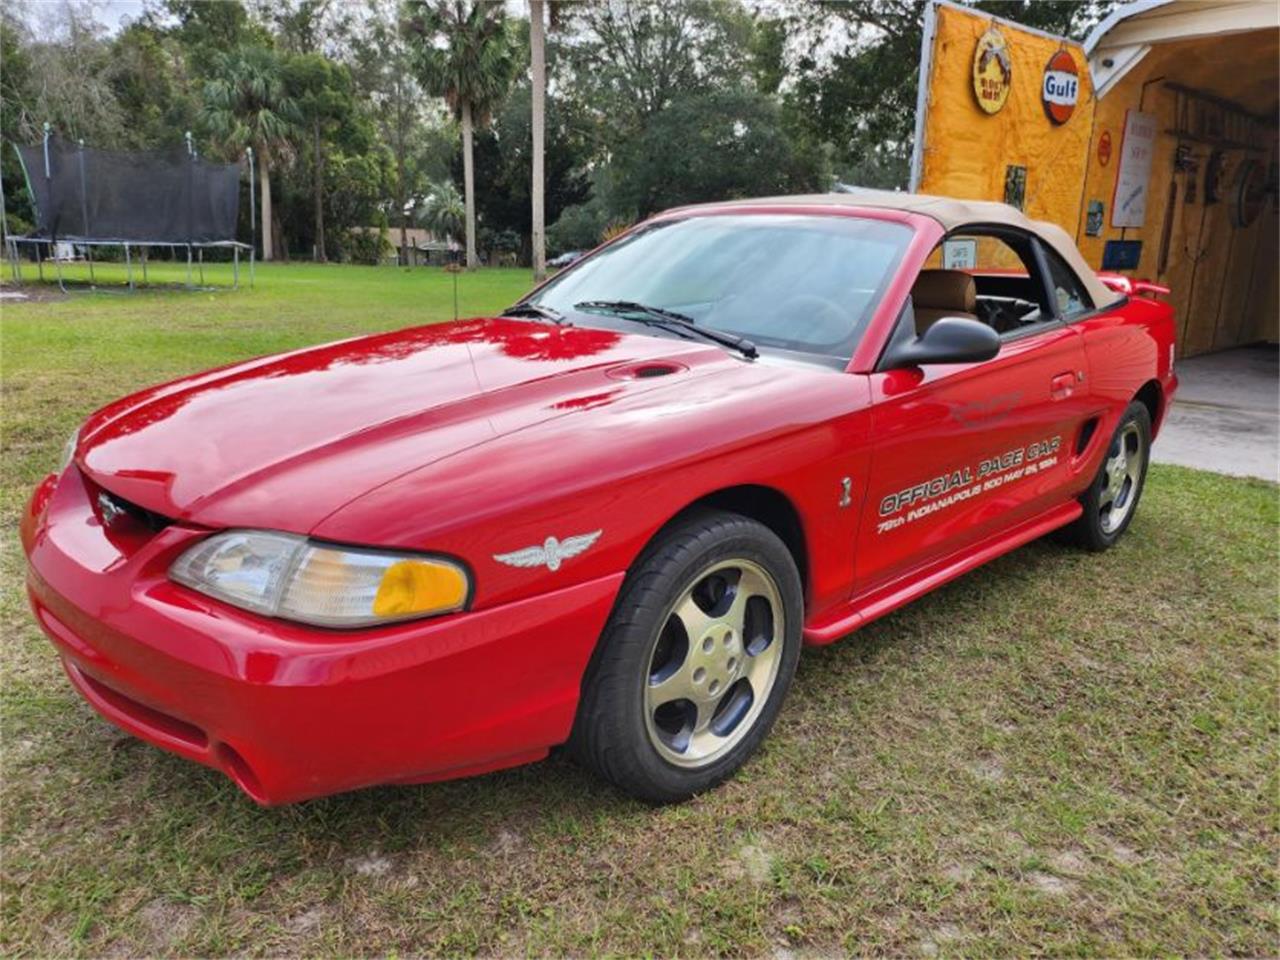 For Sale: 1994 Ford Mustang in Hobart, Indiana for sale in Hobart, IN